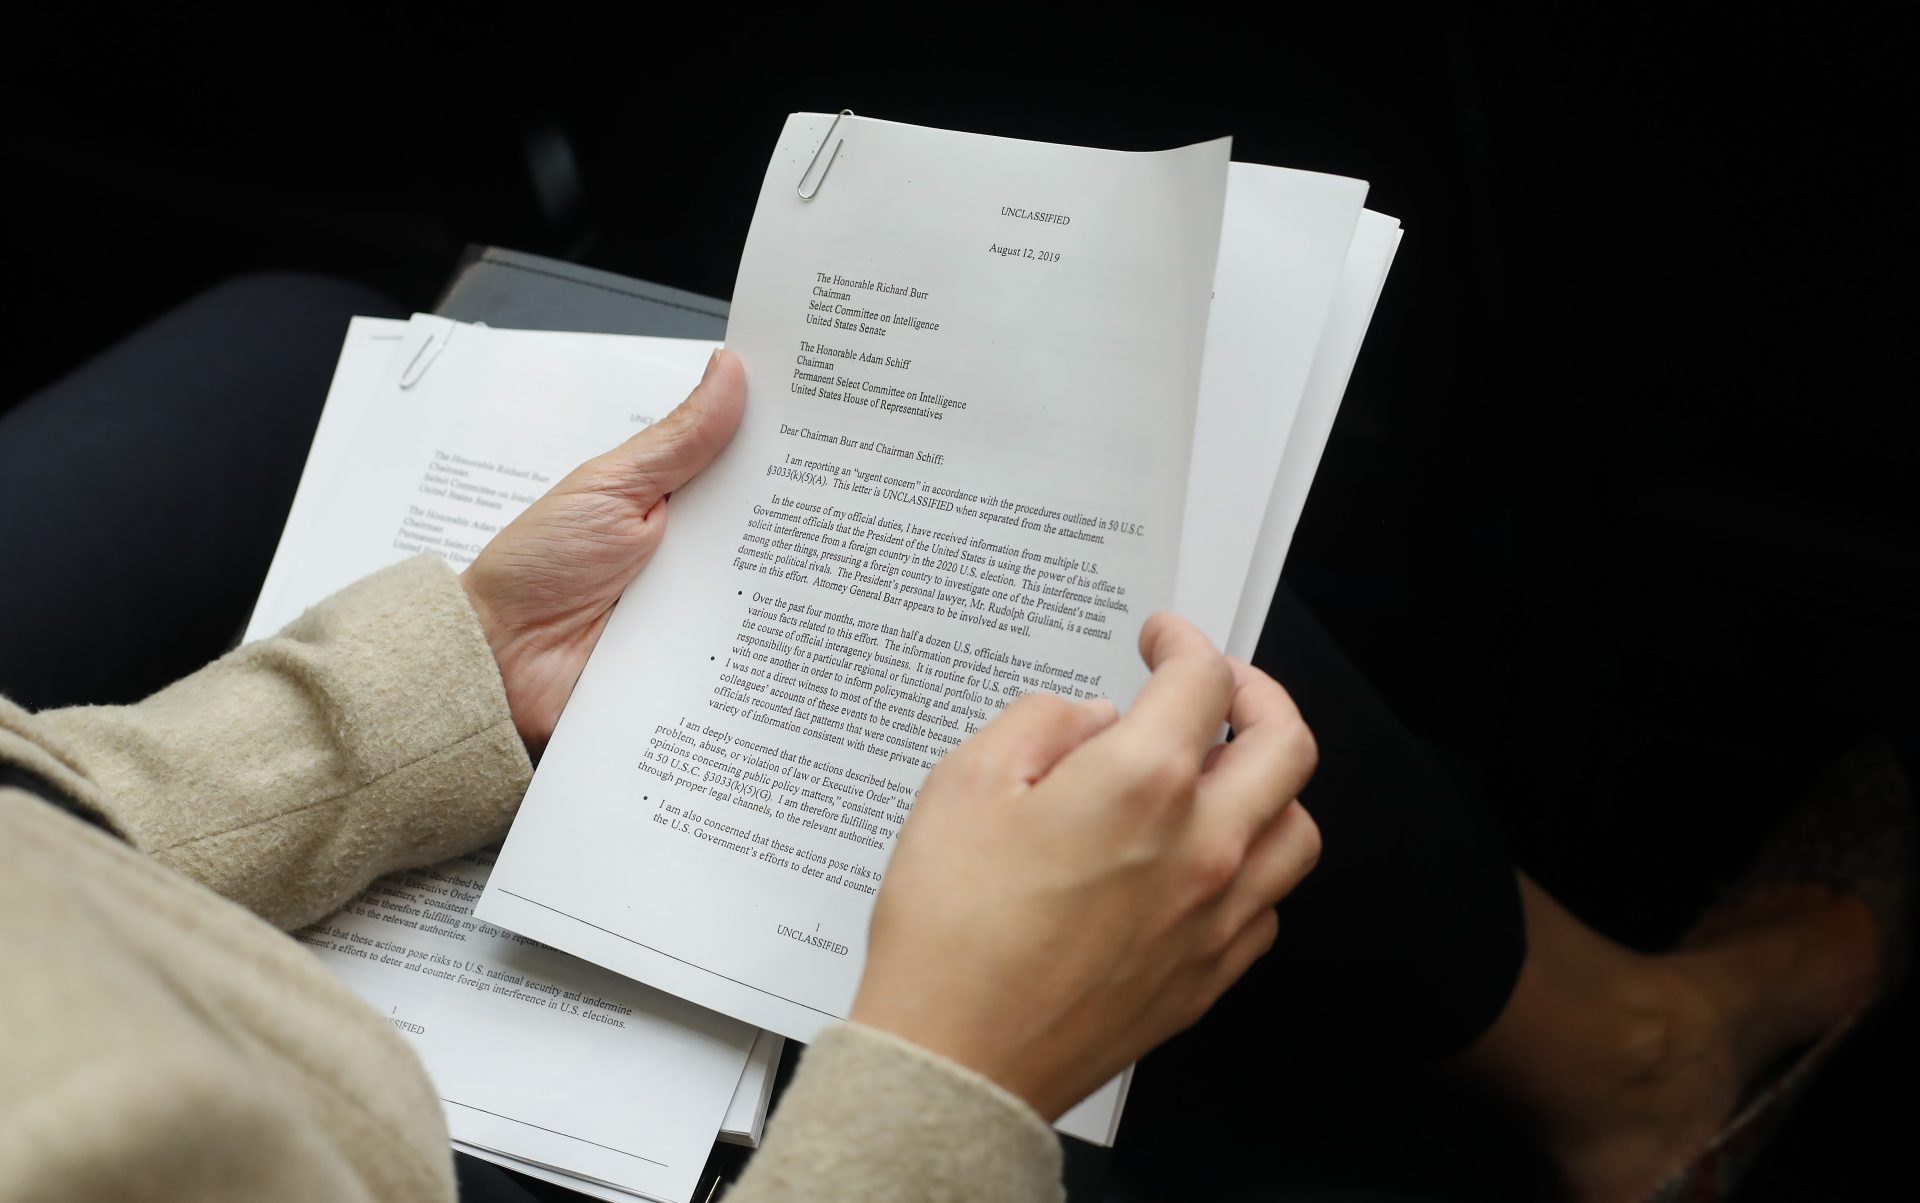 A member of the audience holds a copy of the Whistle-Blower Complaint letter sent to Senate and House Intelligence Committees during testimony by Acting Director of National Intelligence Joseph Maguire before the House Intelligence Committee on Capitol Hill in Washington, Thursday, Sept. 26, 2019.